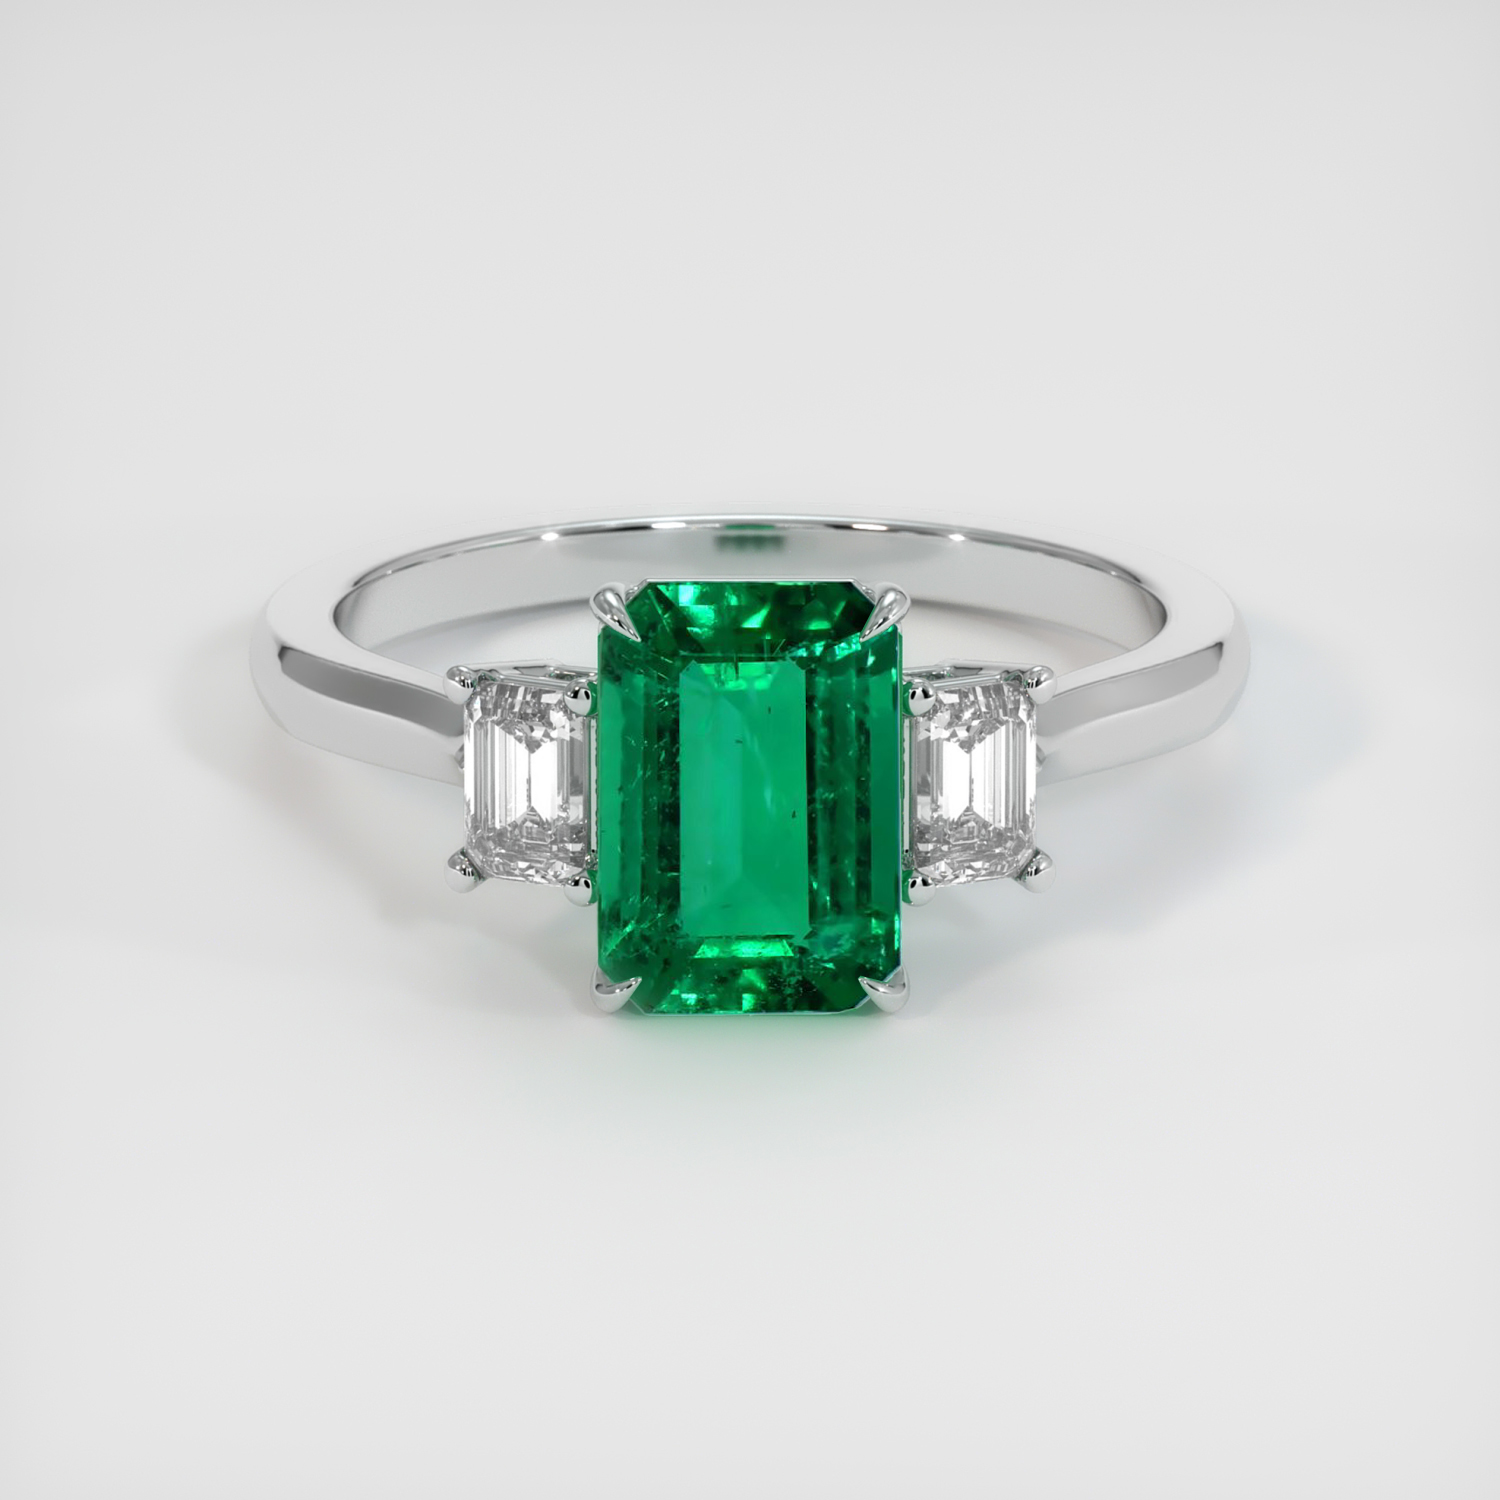 Emerald Ring 2.28 Ct. 18K White Gold | The Natural Emerald Company